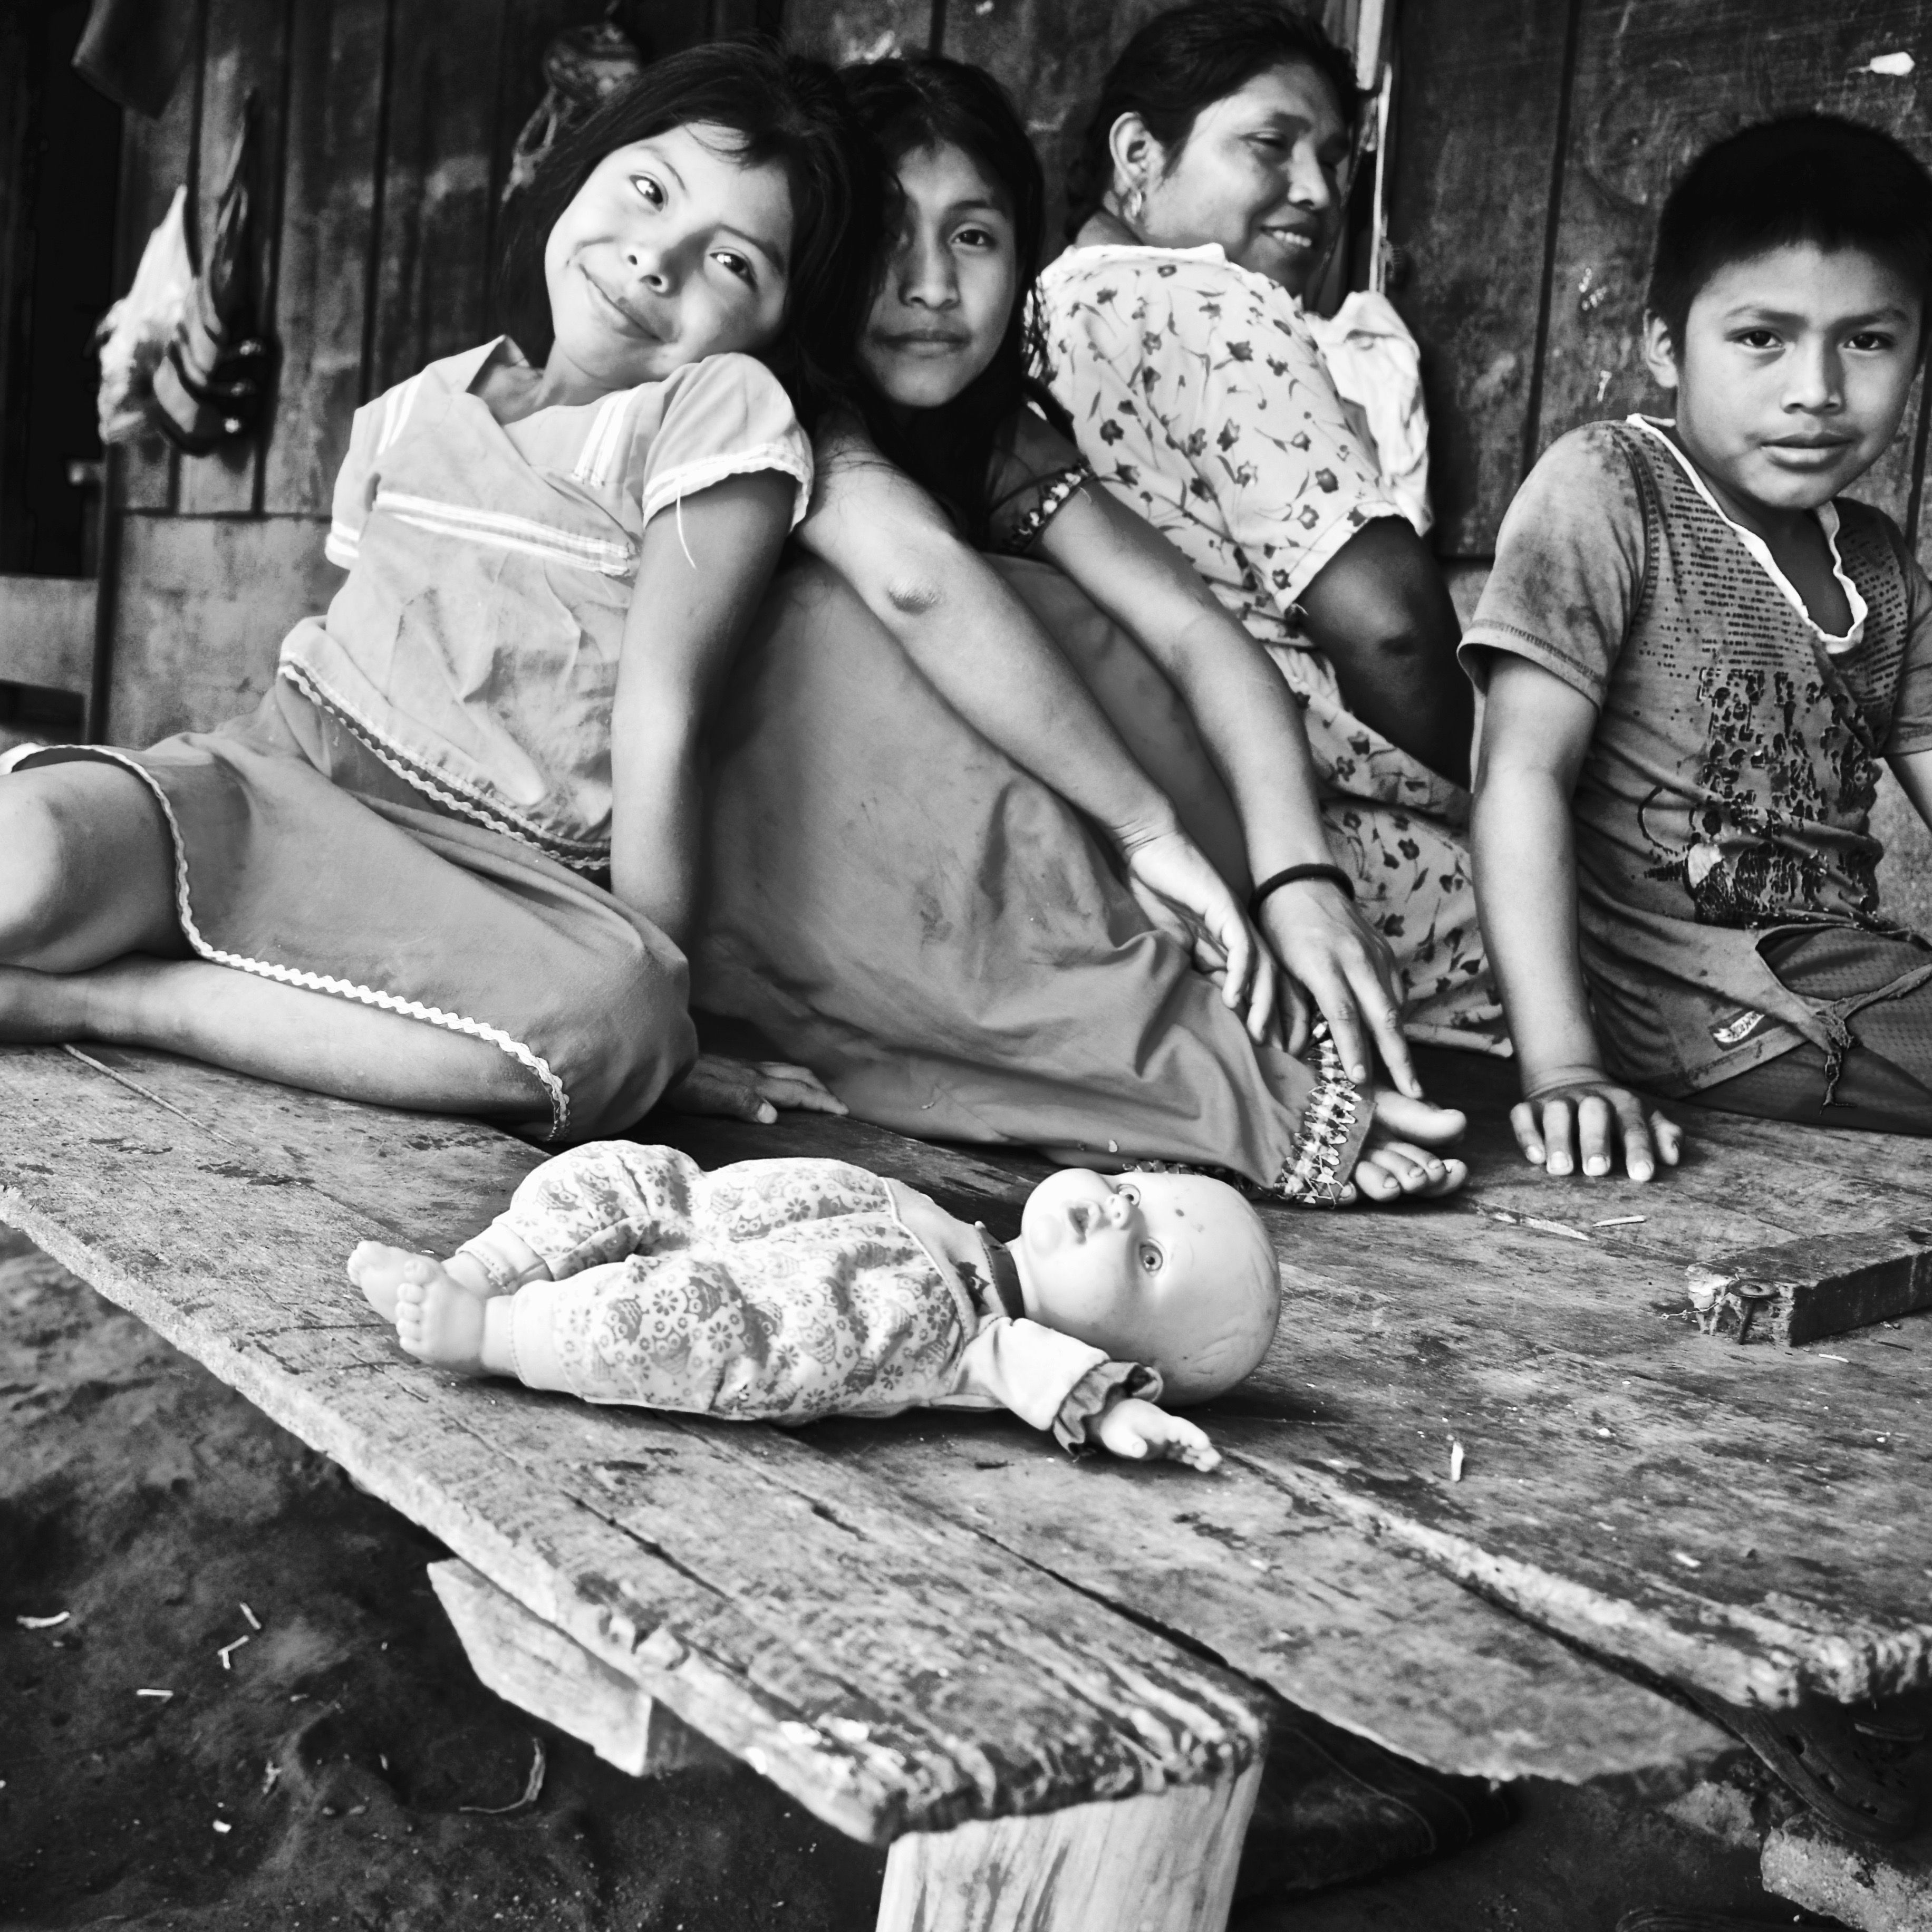 Naida and her family live in a bache located on a coffee farm in southern Costa Rica. With her husband and children, she waits yearly for the coffee harvest in order to gain income for her family. Image by Samira Tella. Costa Rica, 2018.